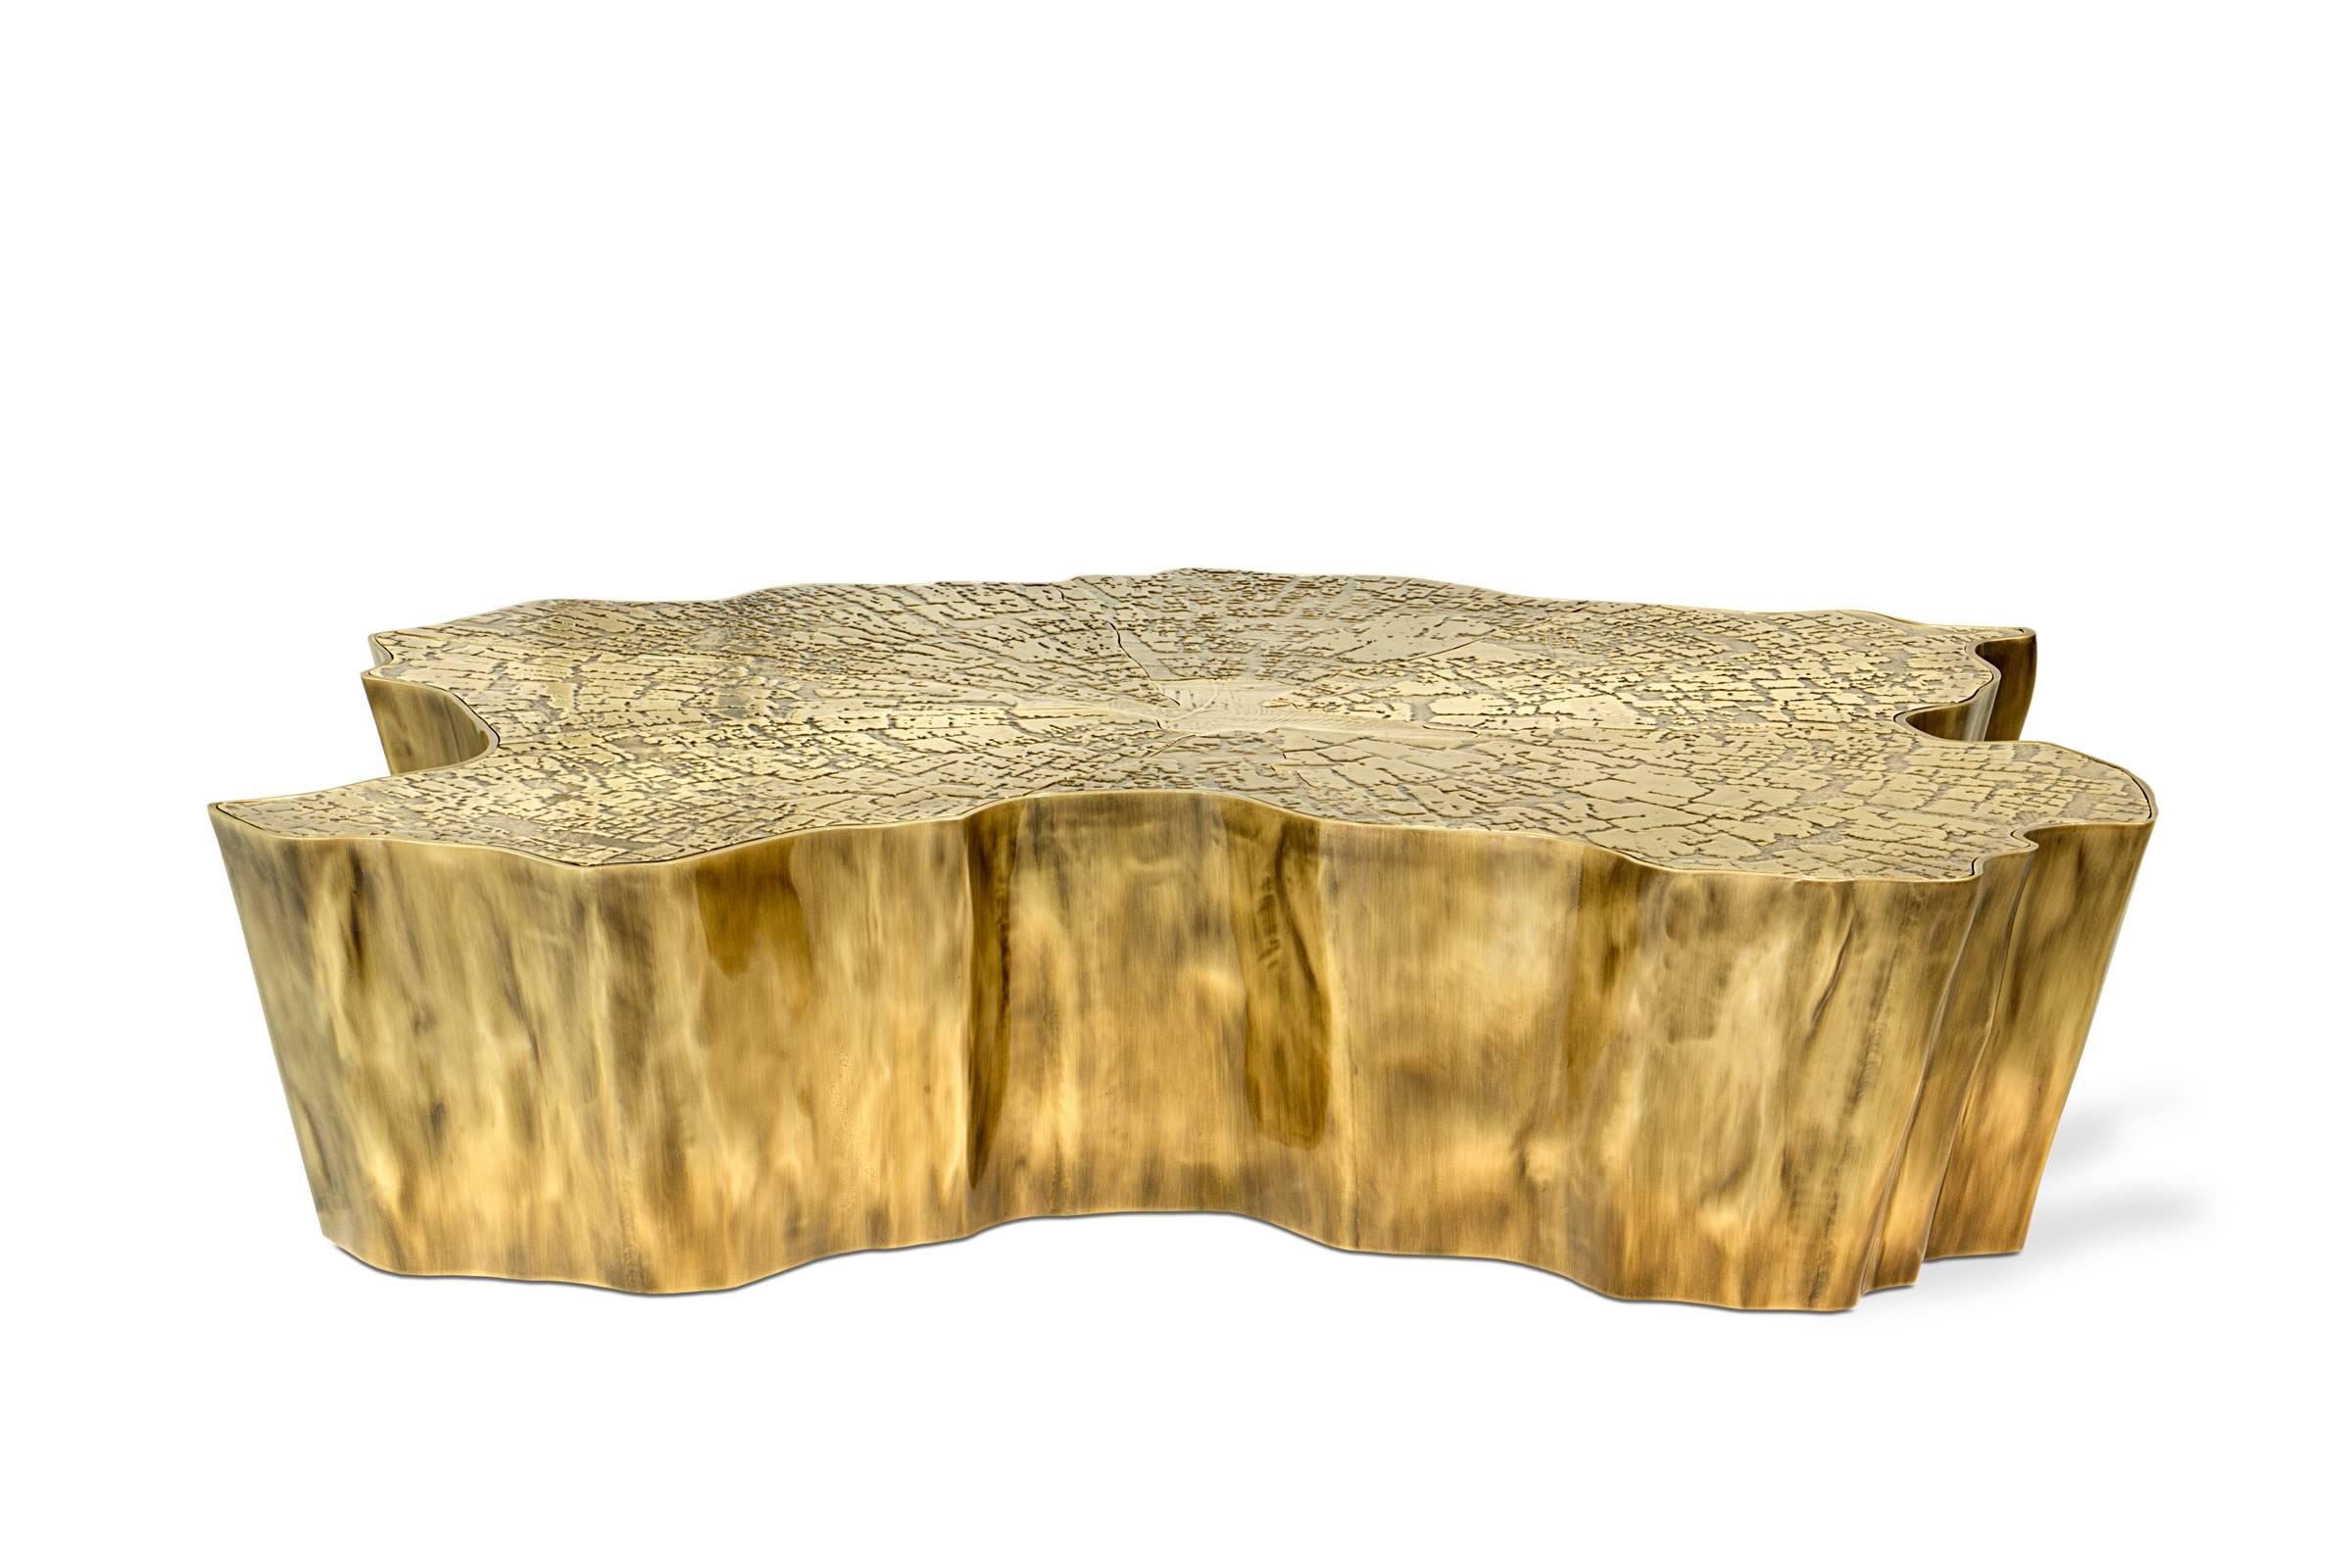 Coffee table Heaven with polished solid brass. 
Available in two sizes:
L 123 x D 102 x H 30cm, price: 30500,00€.
L 138 x D 95 x H 36cm, price: 32900,00€.
Also available in side table Heaven.